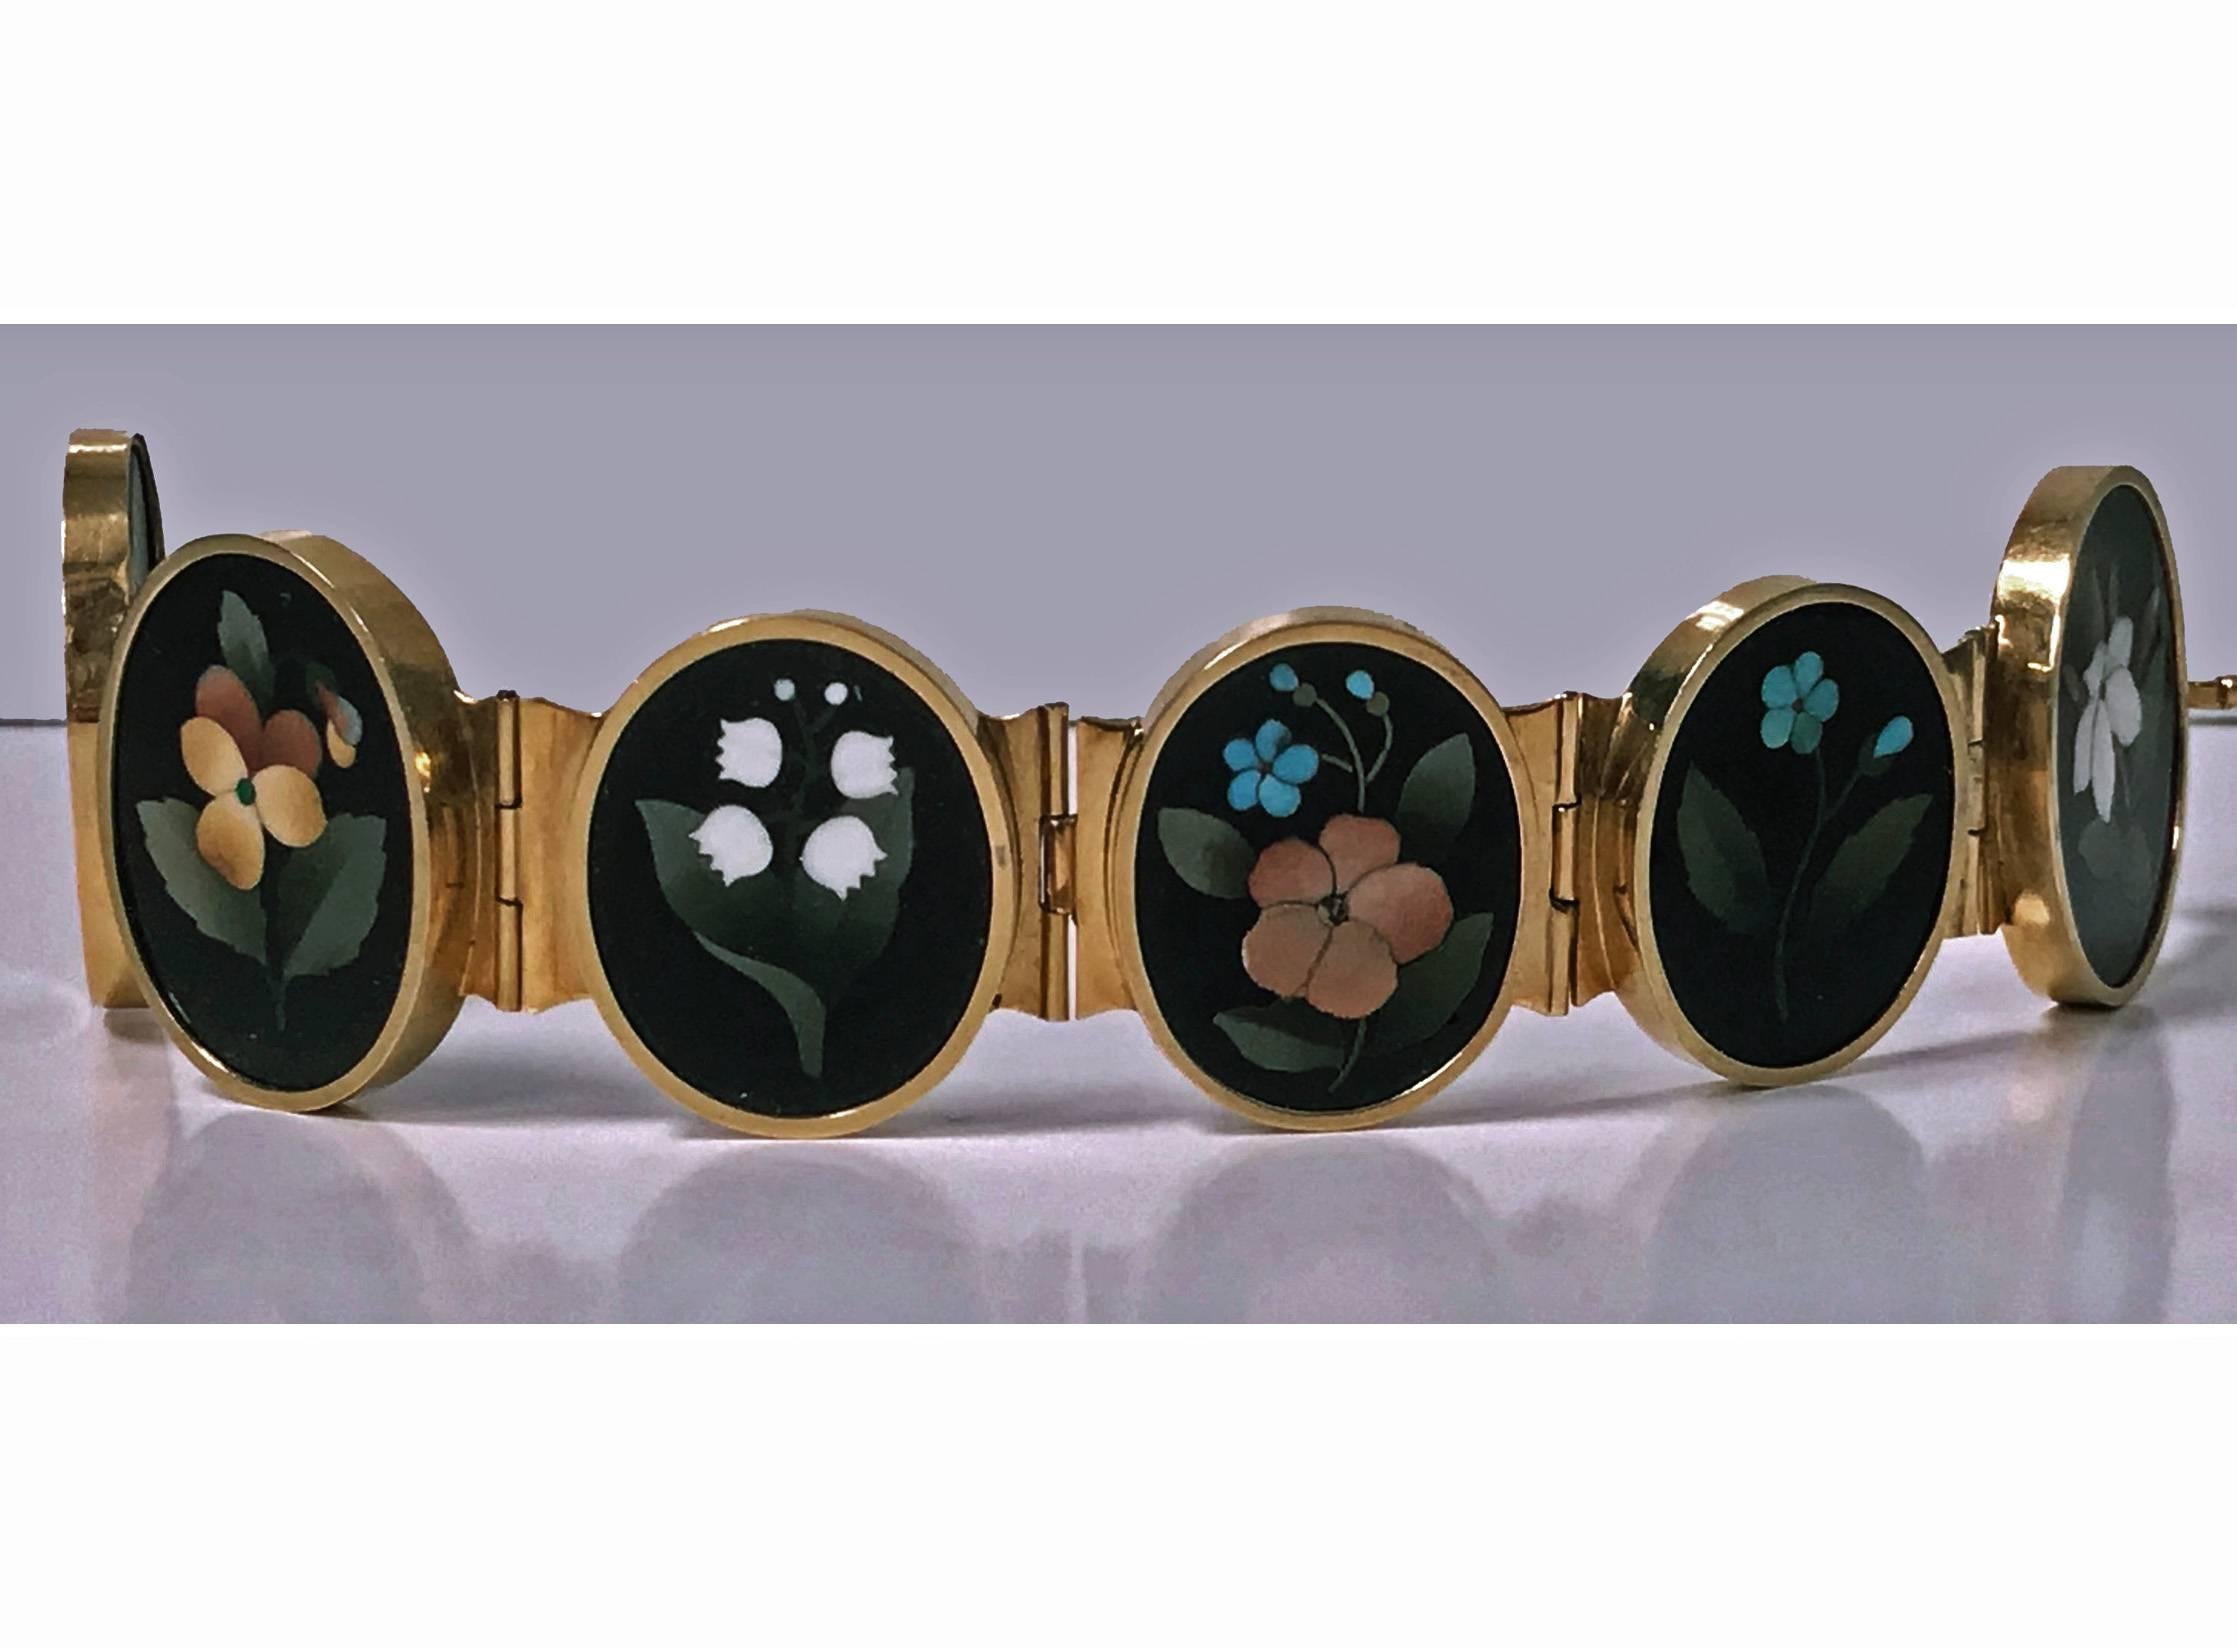 Very Fine 19th century 18K (tested) Gold Pietra Dura Bracelet, Italy C.1875. The bracelet with six slightly graduated oval bezel set pietra dura depicting foliage, berries and flowers, hinged gold links between, terminating with tongue box clasp